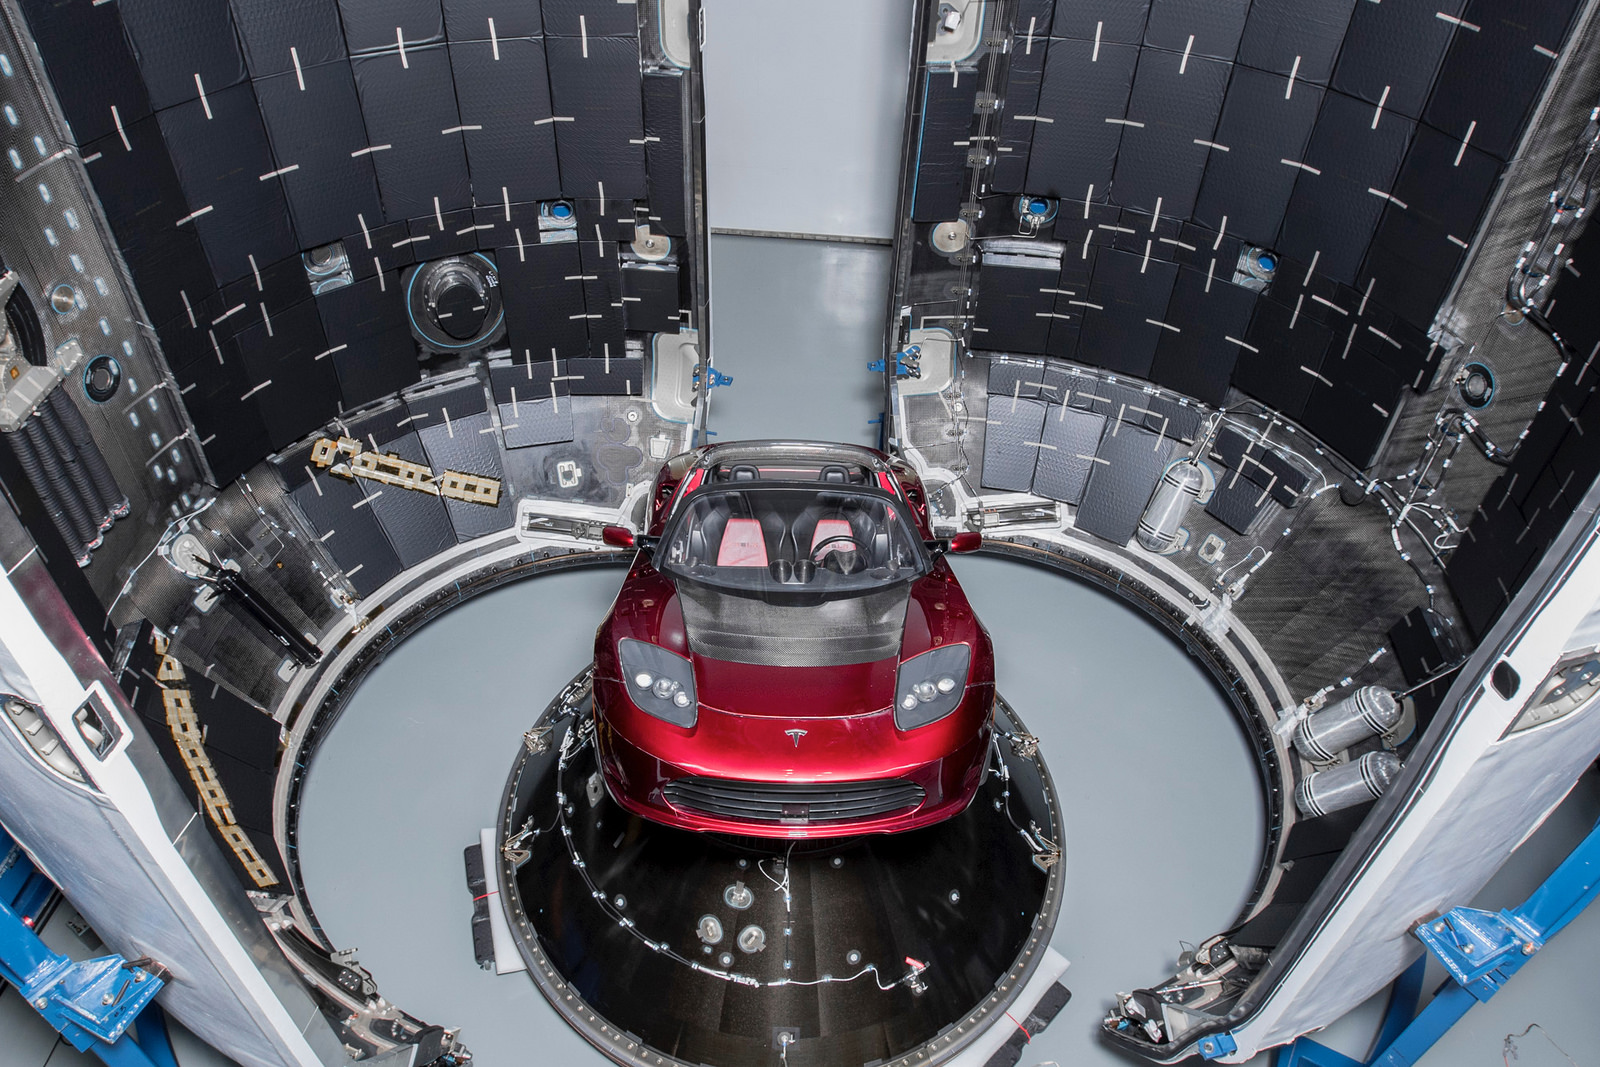 Tesla Roadster pictured in the Falcon Heavy rocket payload bay during launch preparations